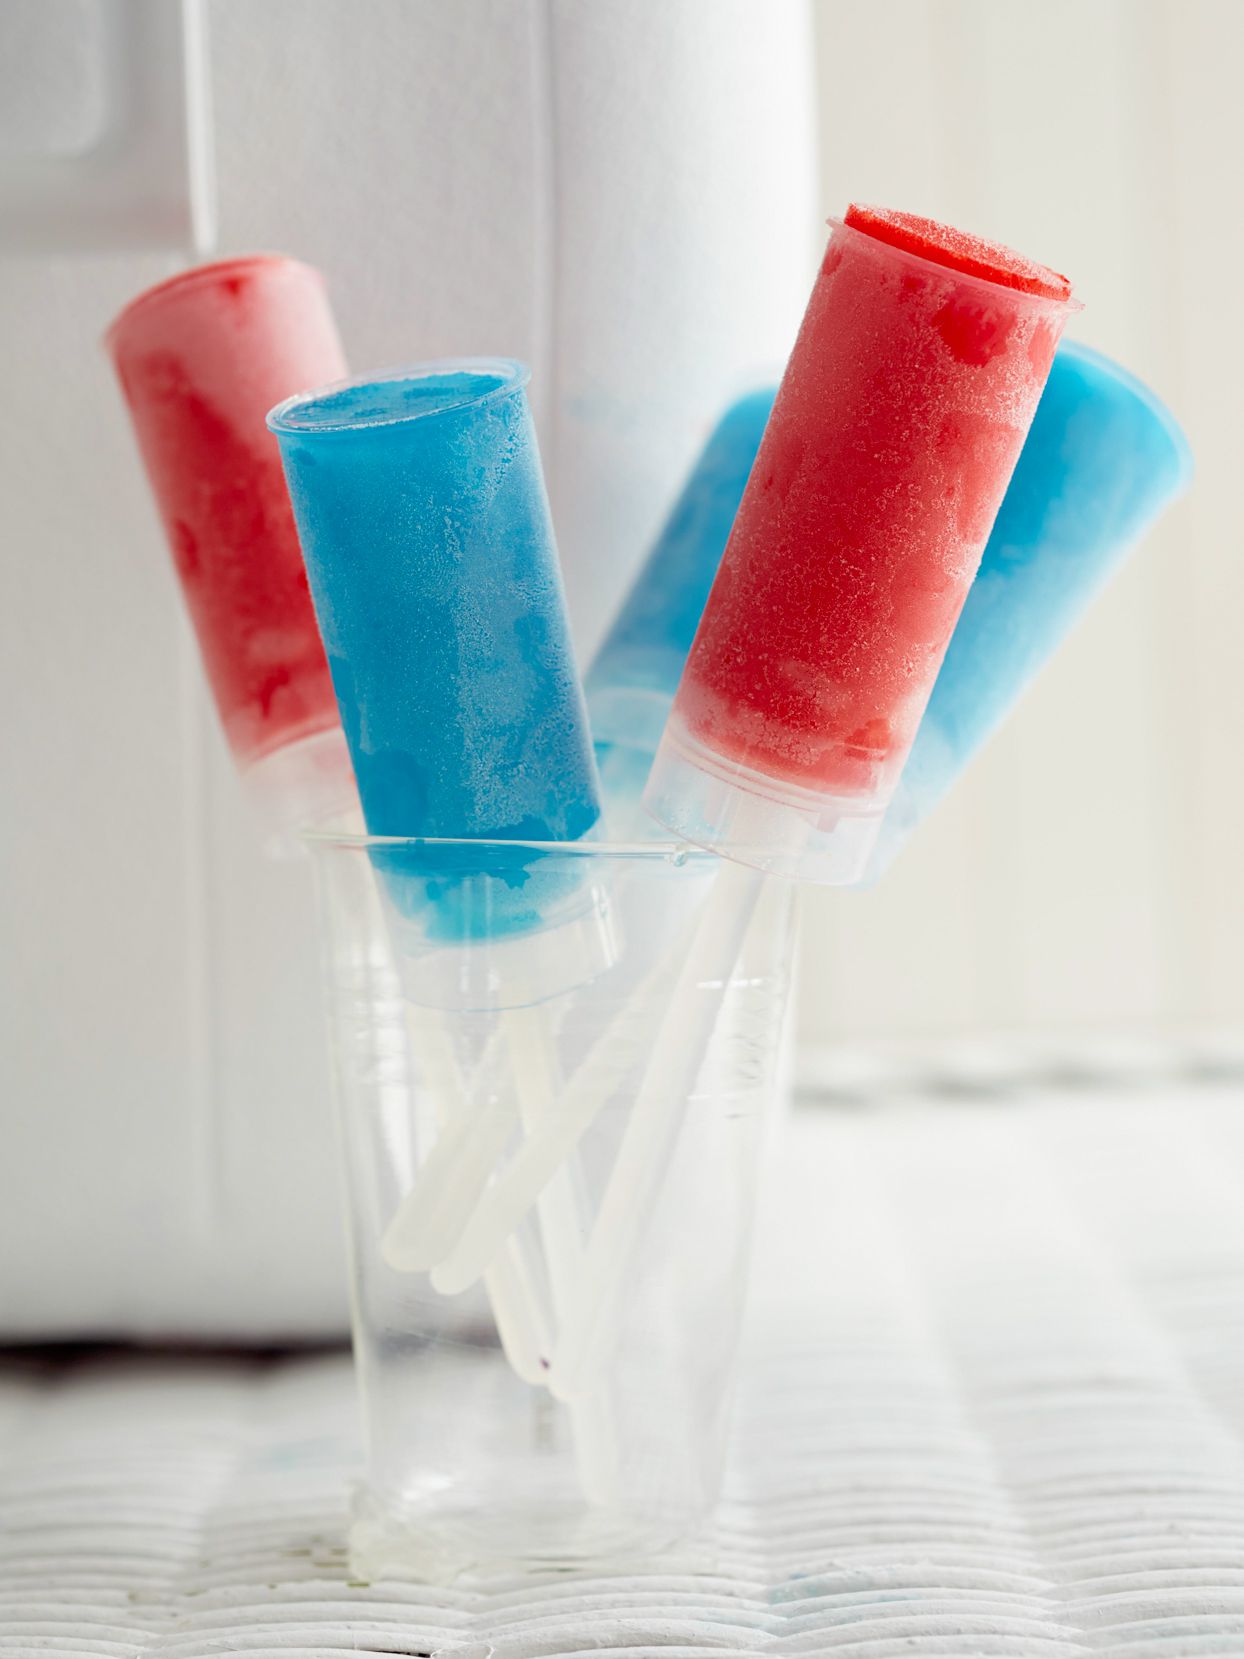 red and blue Rocket Pops